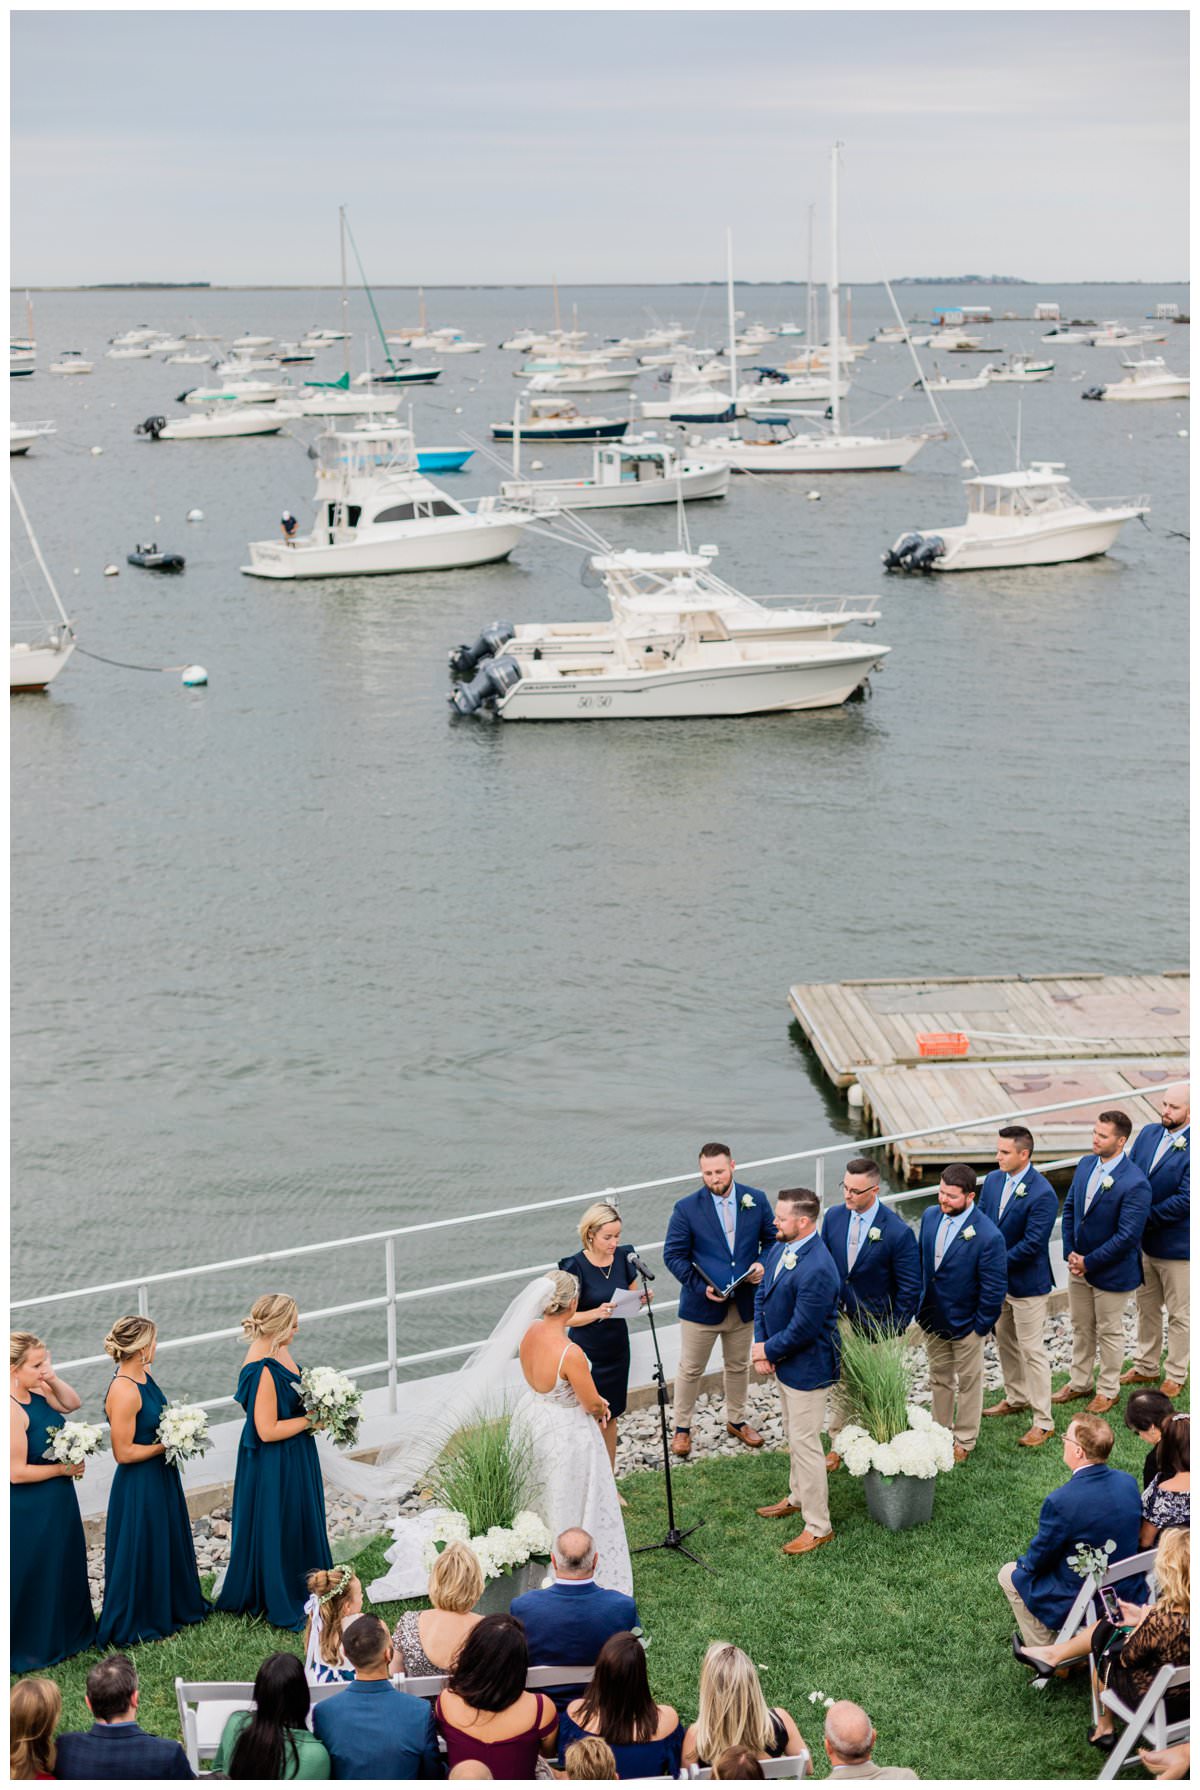 ceremony on the lawn at duxbury bay maritime school